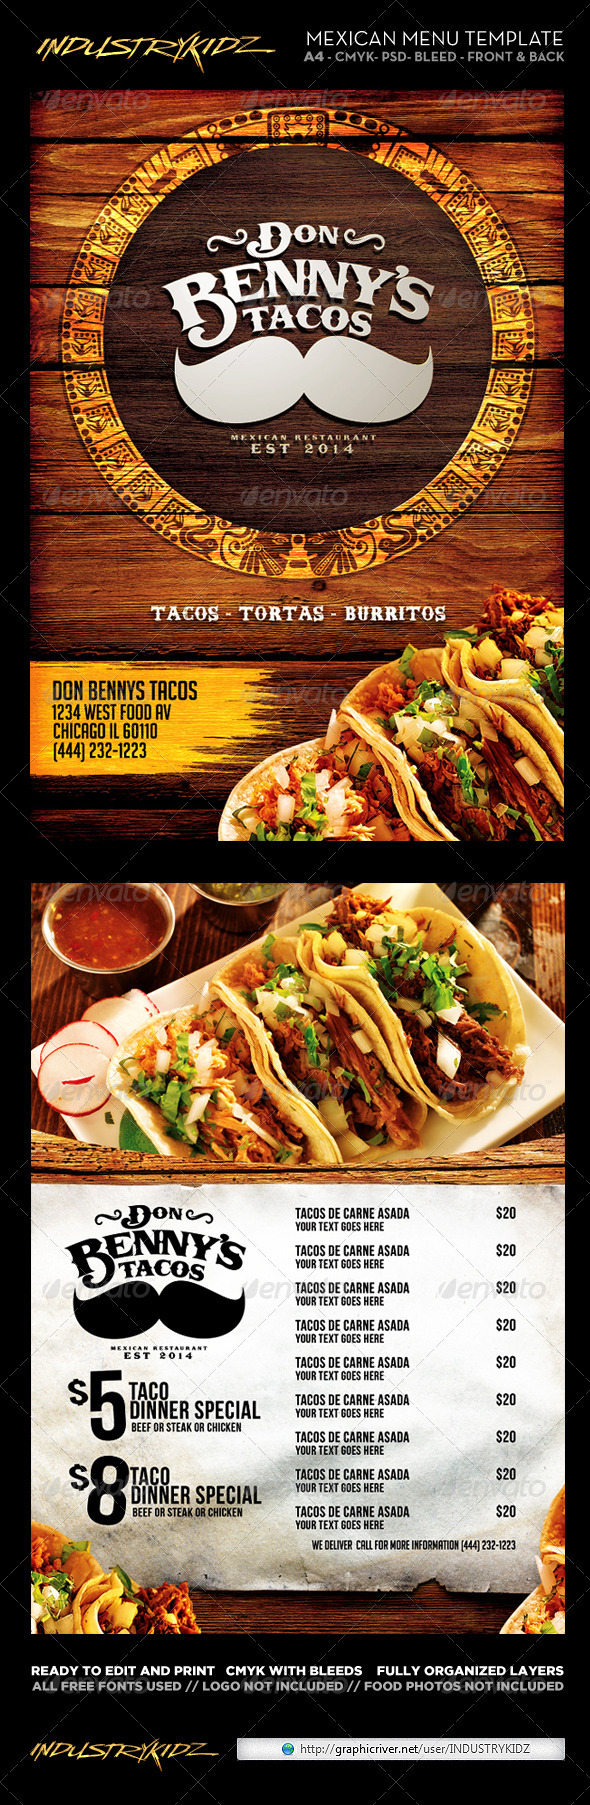 Mexican Menu Template by INDUSTRYKIDZ GraphicRiver